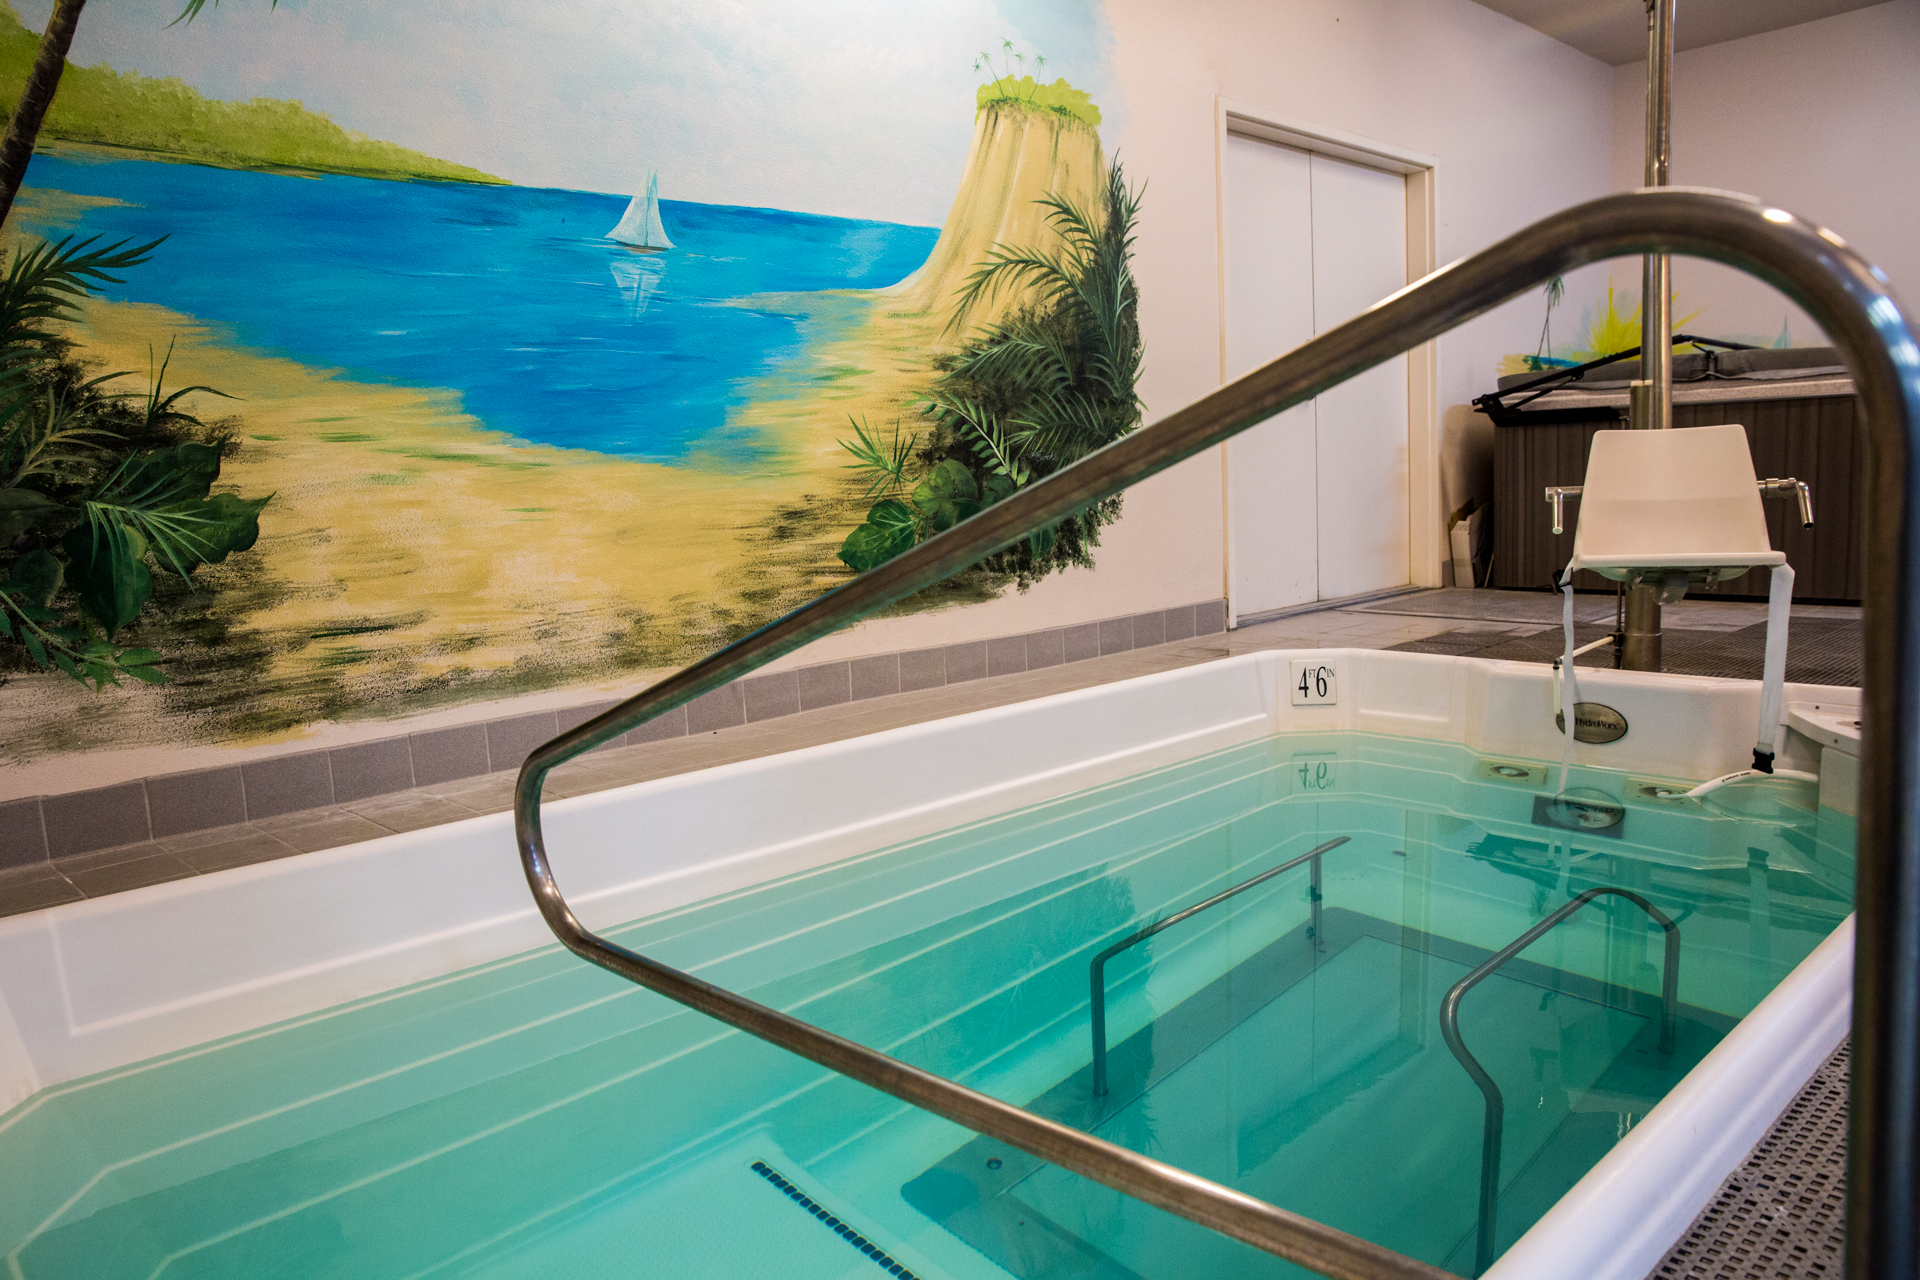 Physical Therapy Swimming Pool & Facility